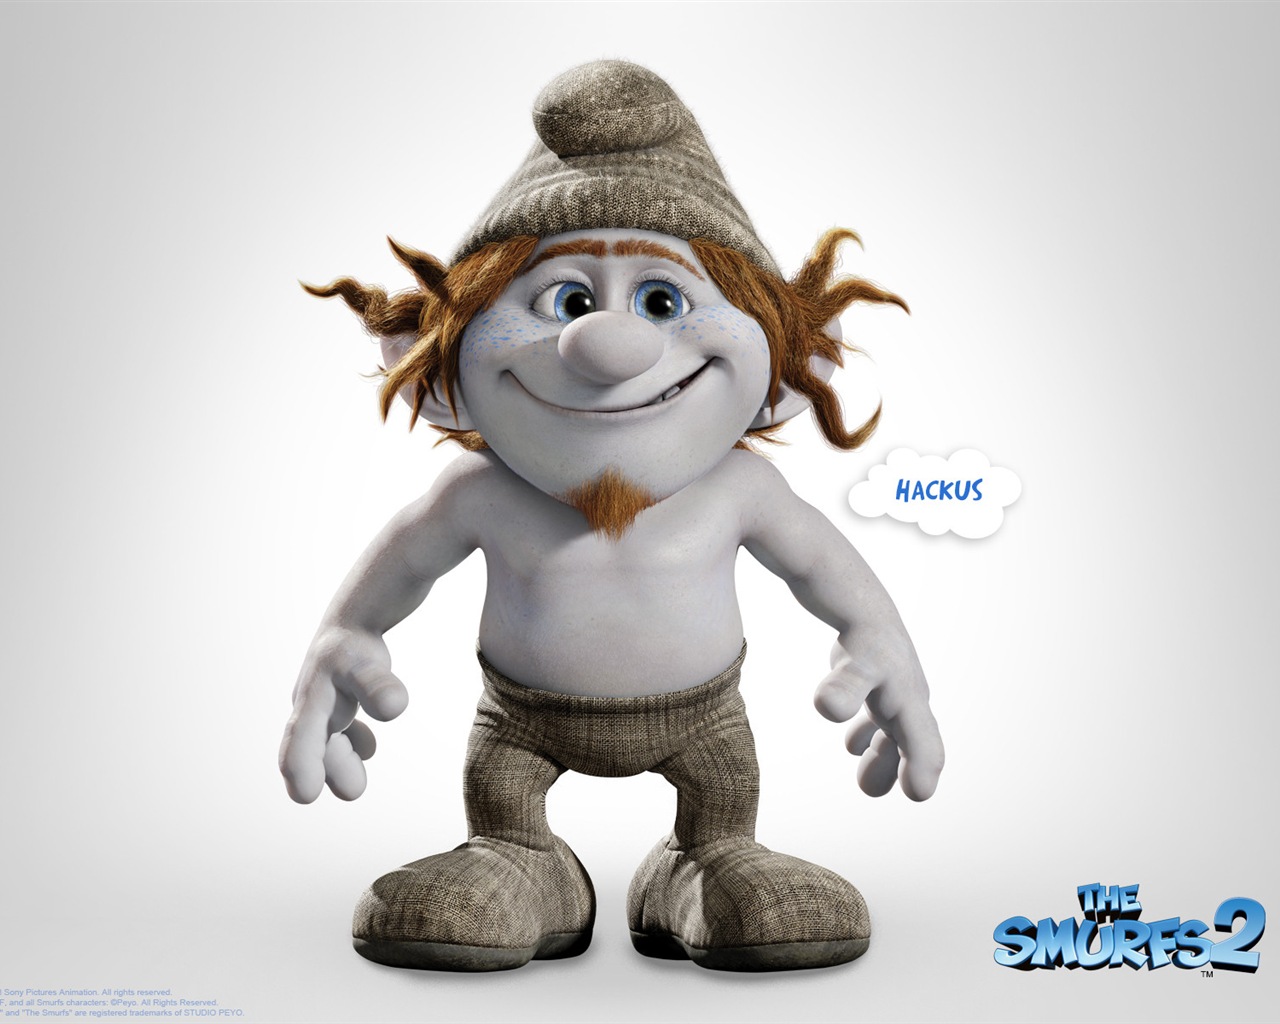 The Smurfs 2 HD movie wallpapers #9 - 1280x1024